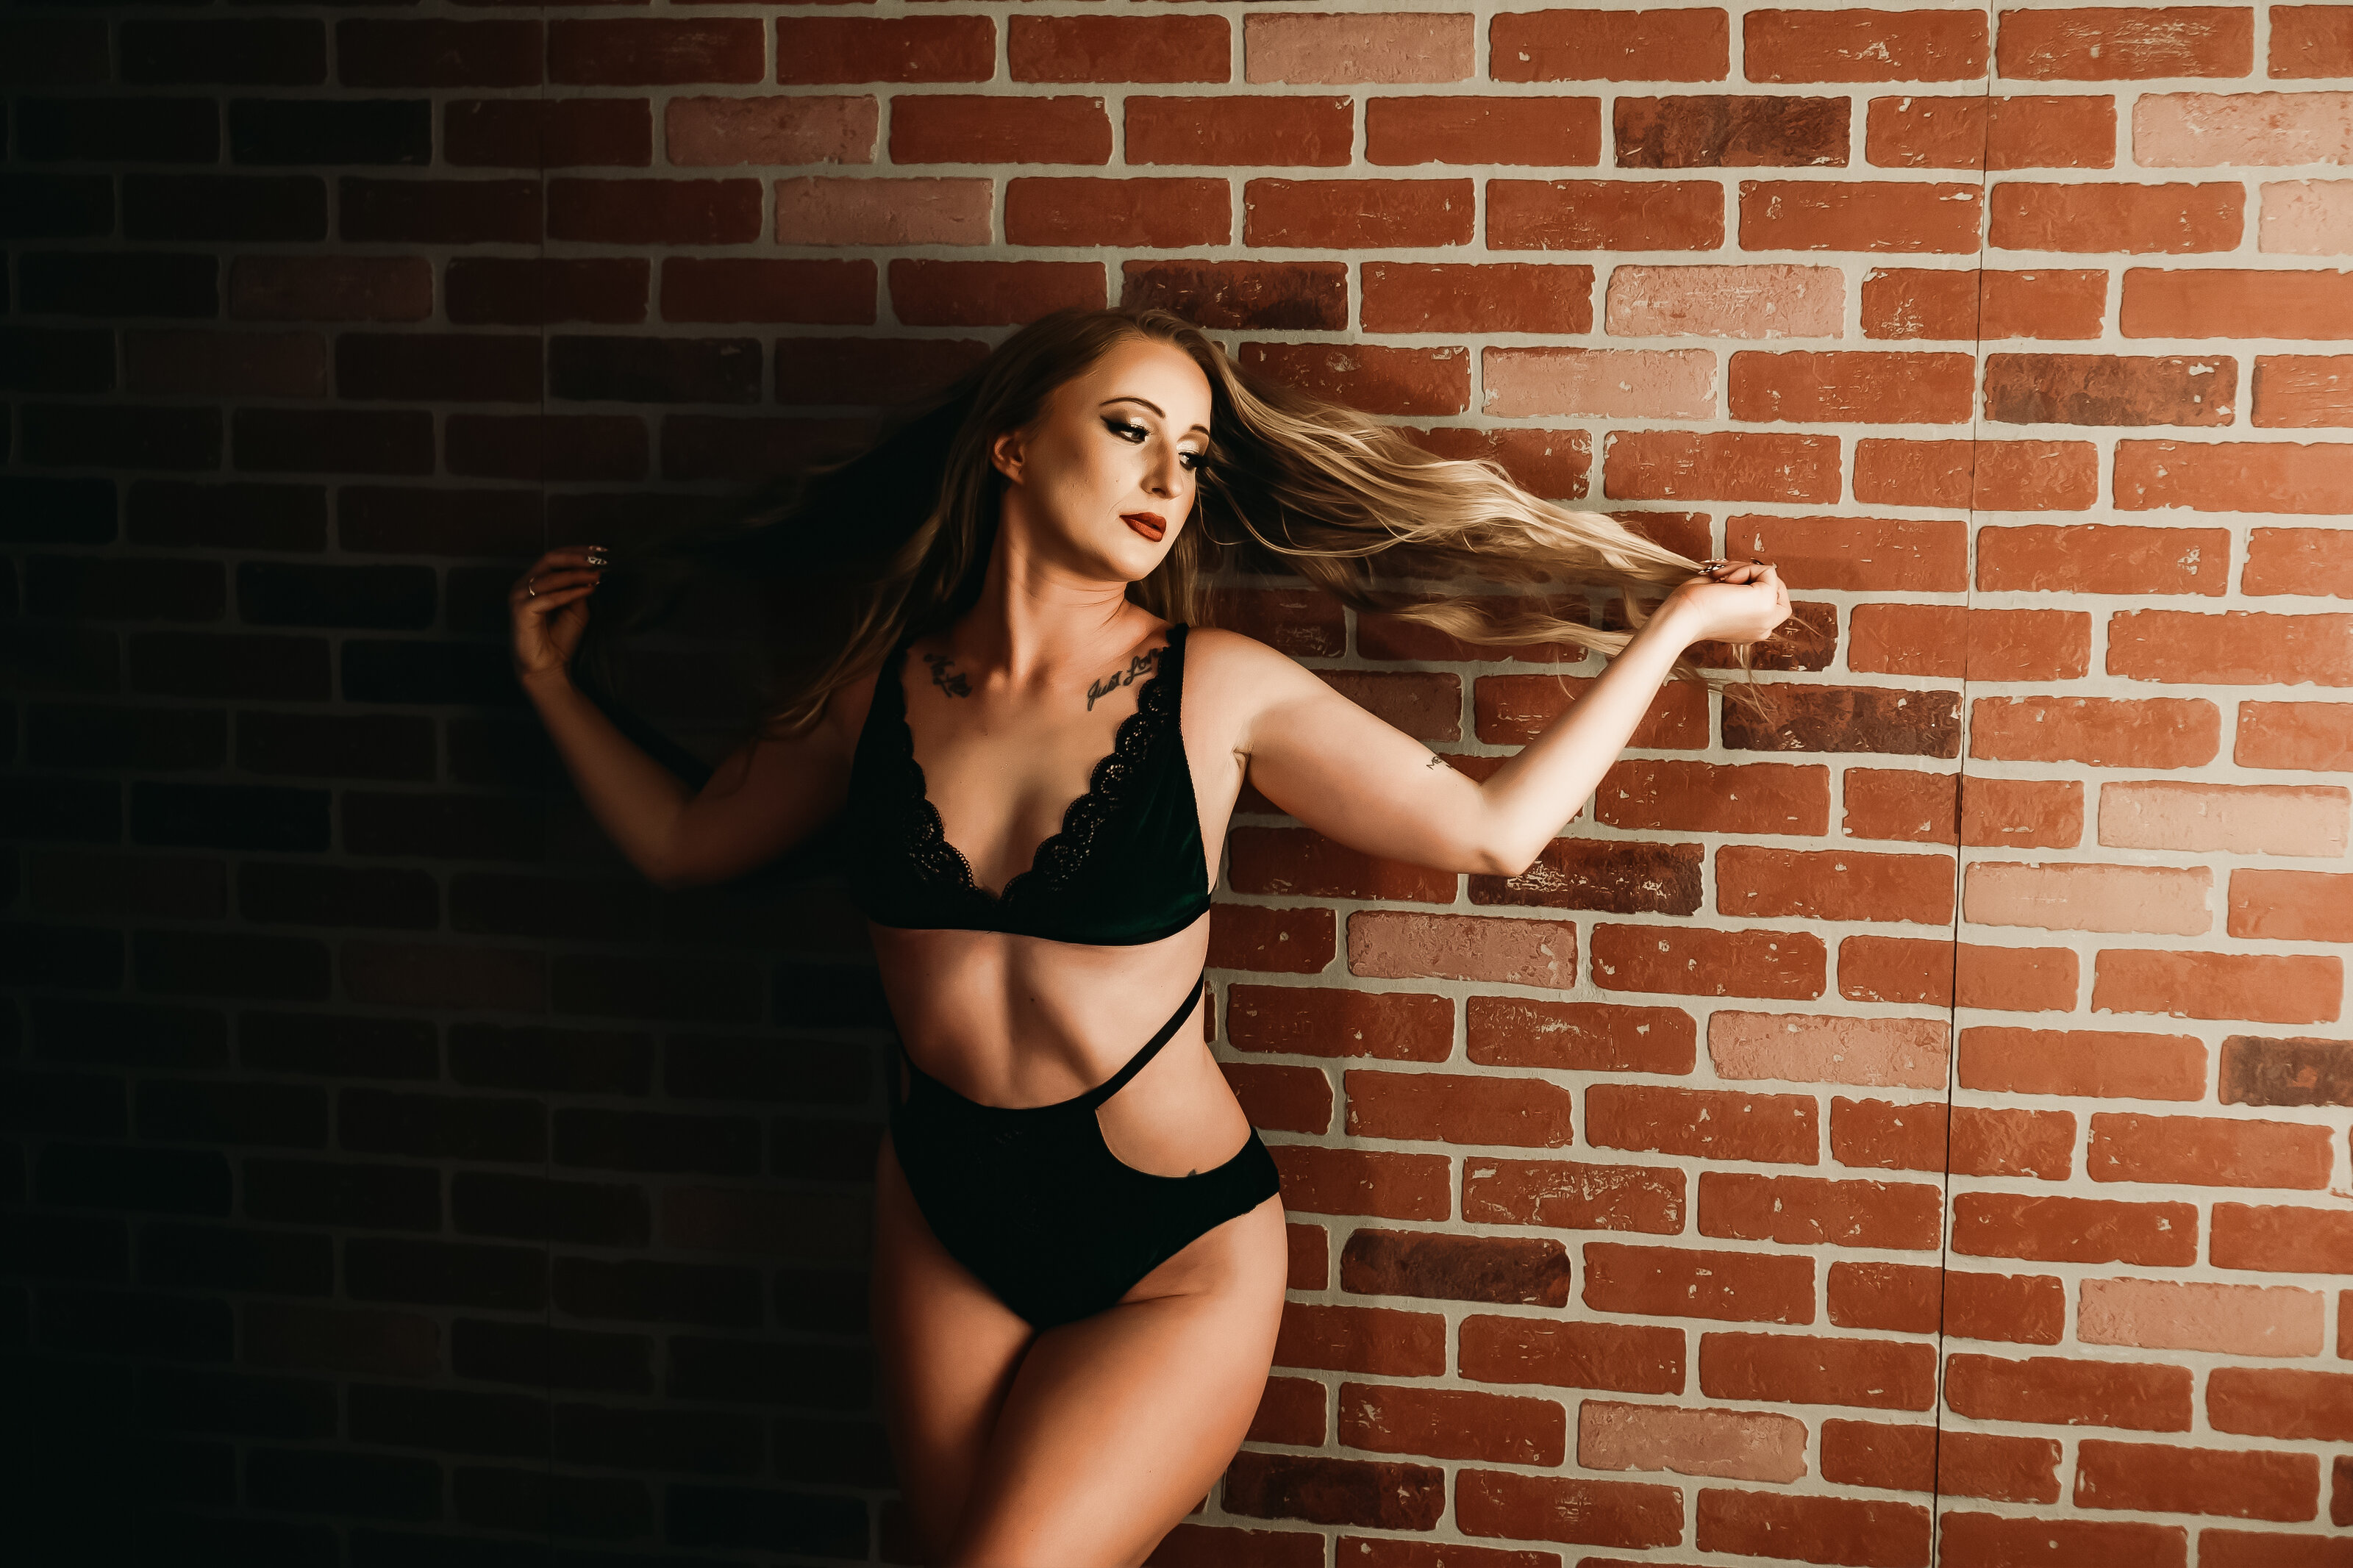 Mastering Natural Poses for Boudoir Photography | Rangefinder